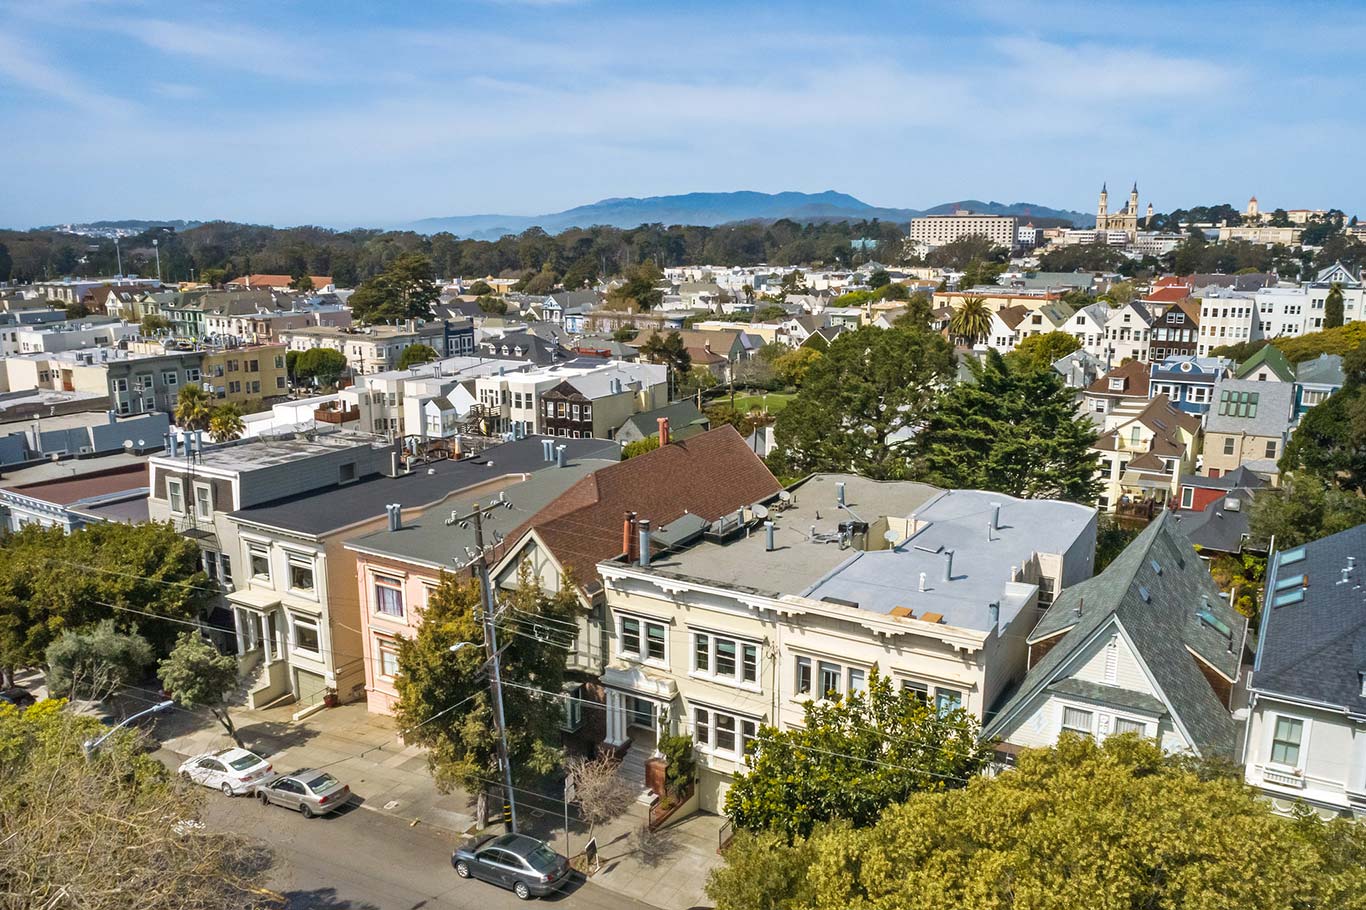 Aerial view of 36 Parnassus, featuring the Cole Valley neighborhood